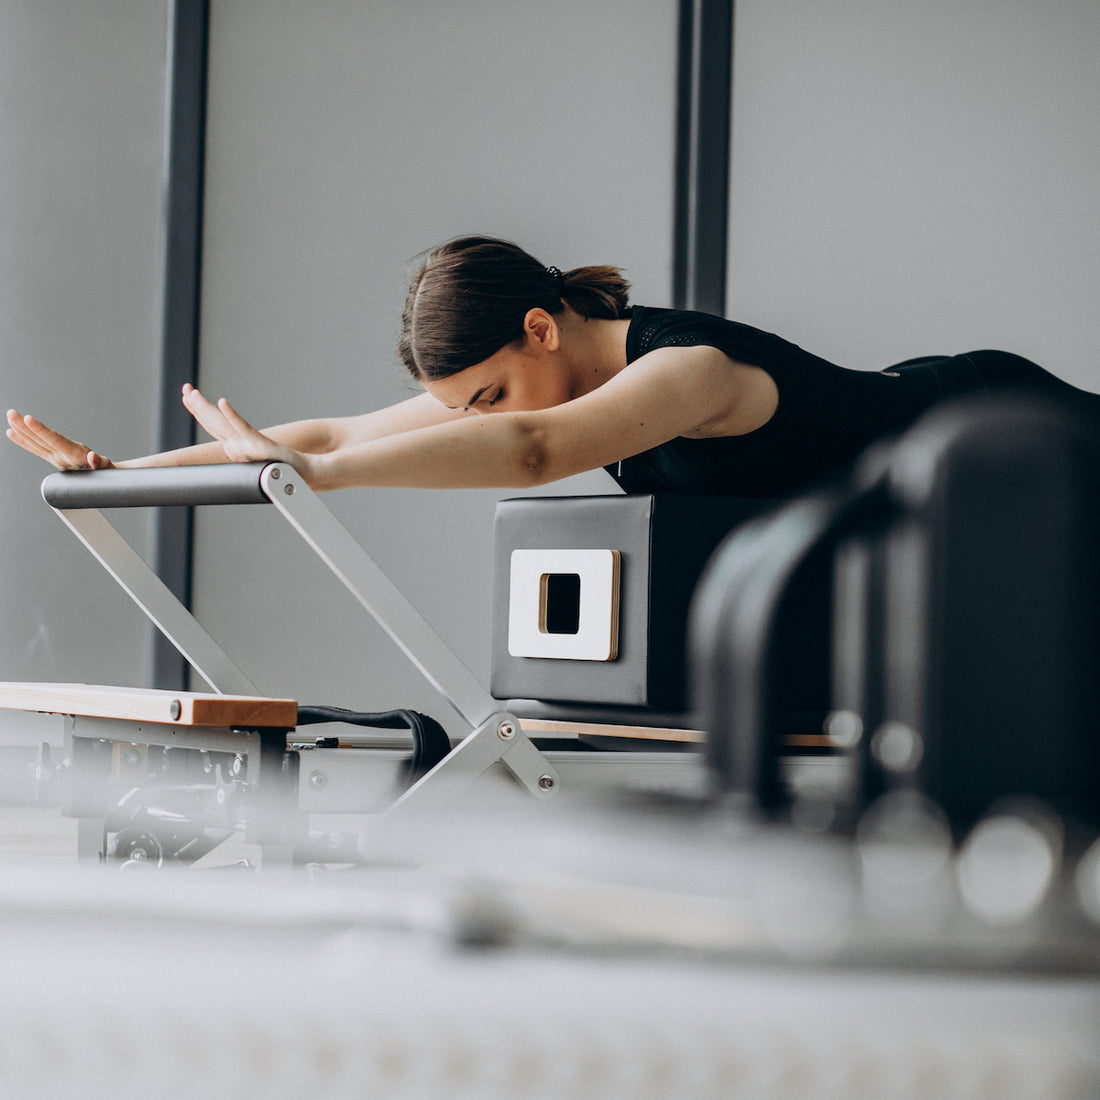 Is Pilates the Secret to Easing Back Pain? – The Pilates Swan